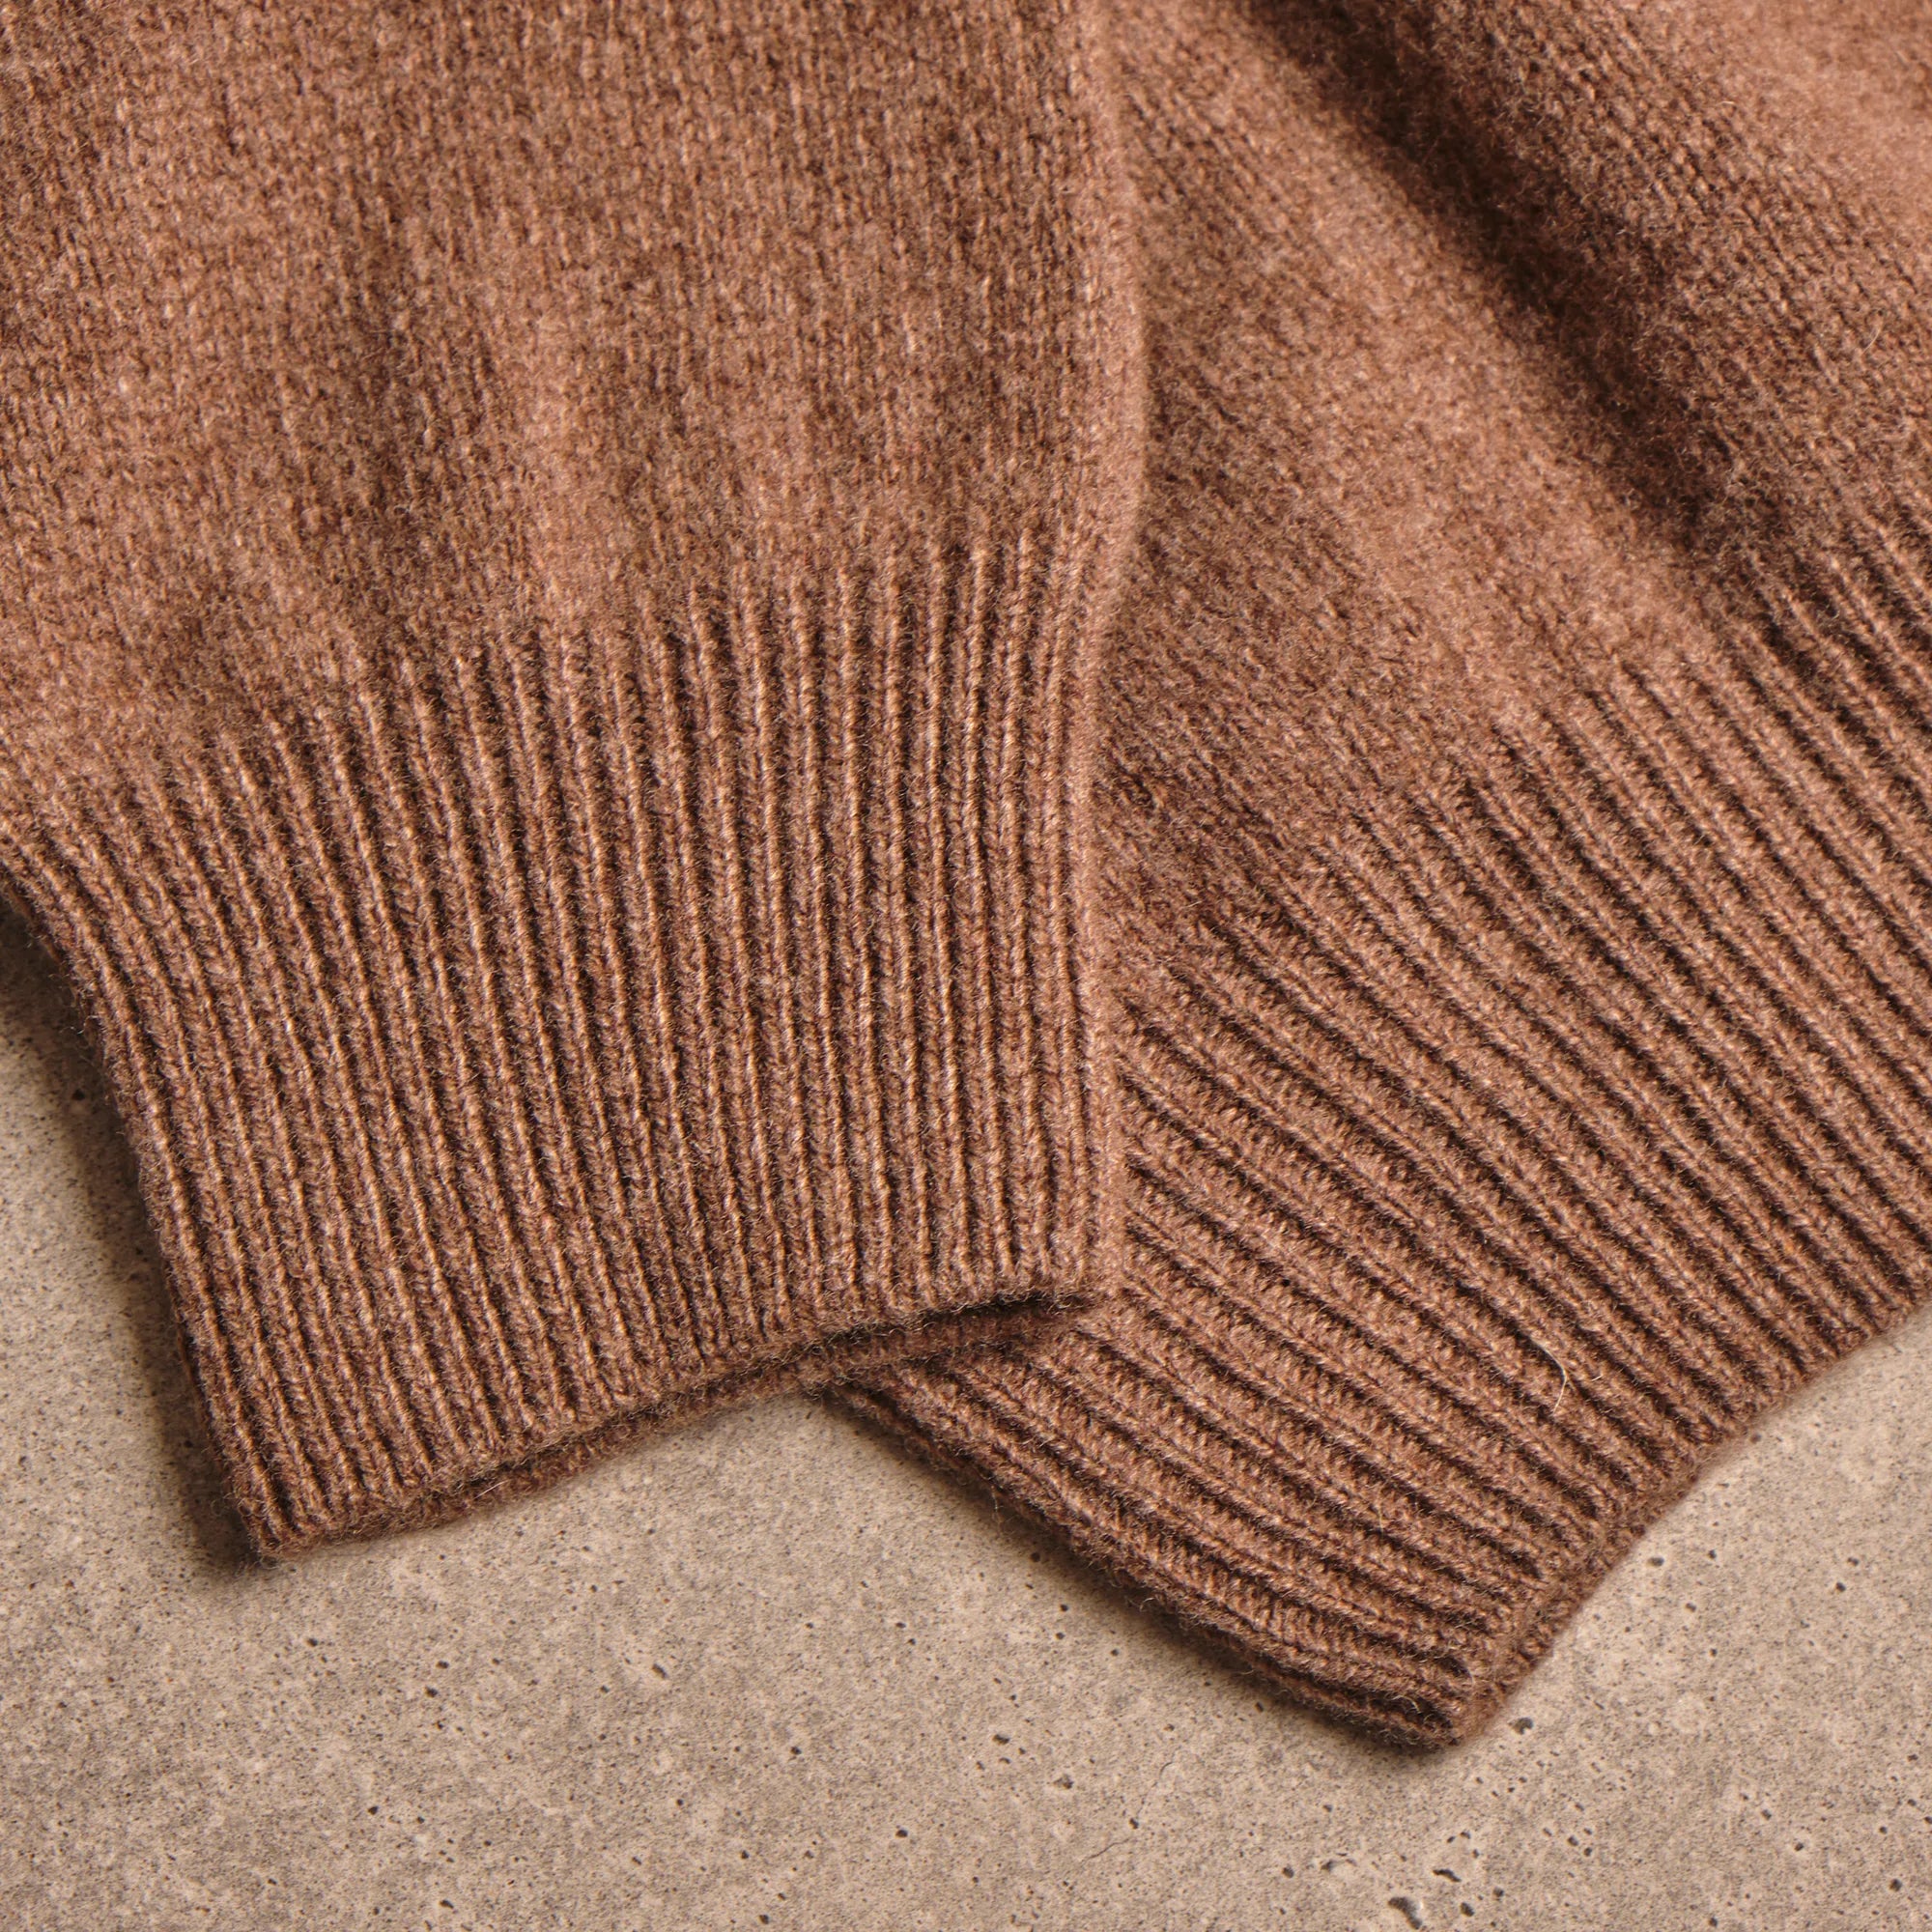 Nutmeg Merino Wool and Cashmere Roll Neck Jumper